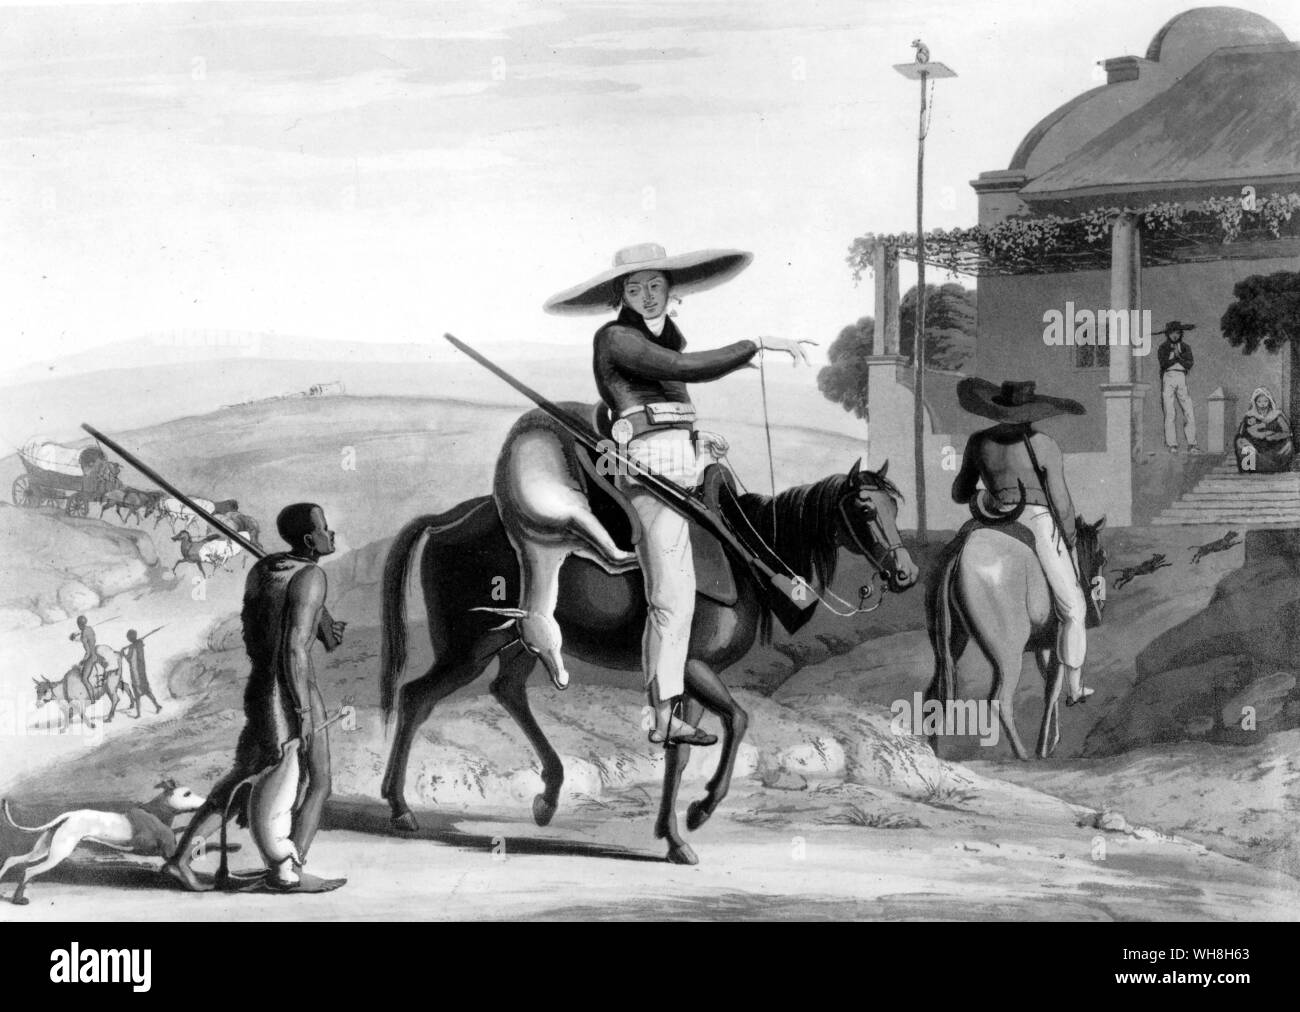 Boors Returning From Hunting by Samuel Daniell, (1775-1811), British artist. The African Adventure - A History of Africa's Explorers by Timothy Severin, page 136. Stock Photo